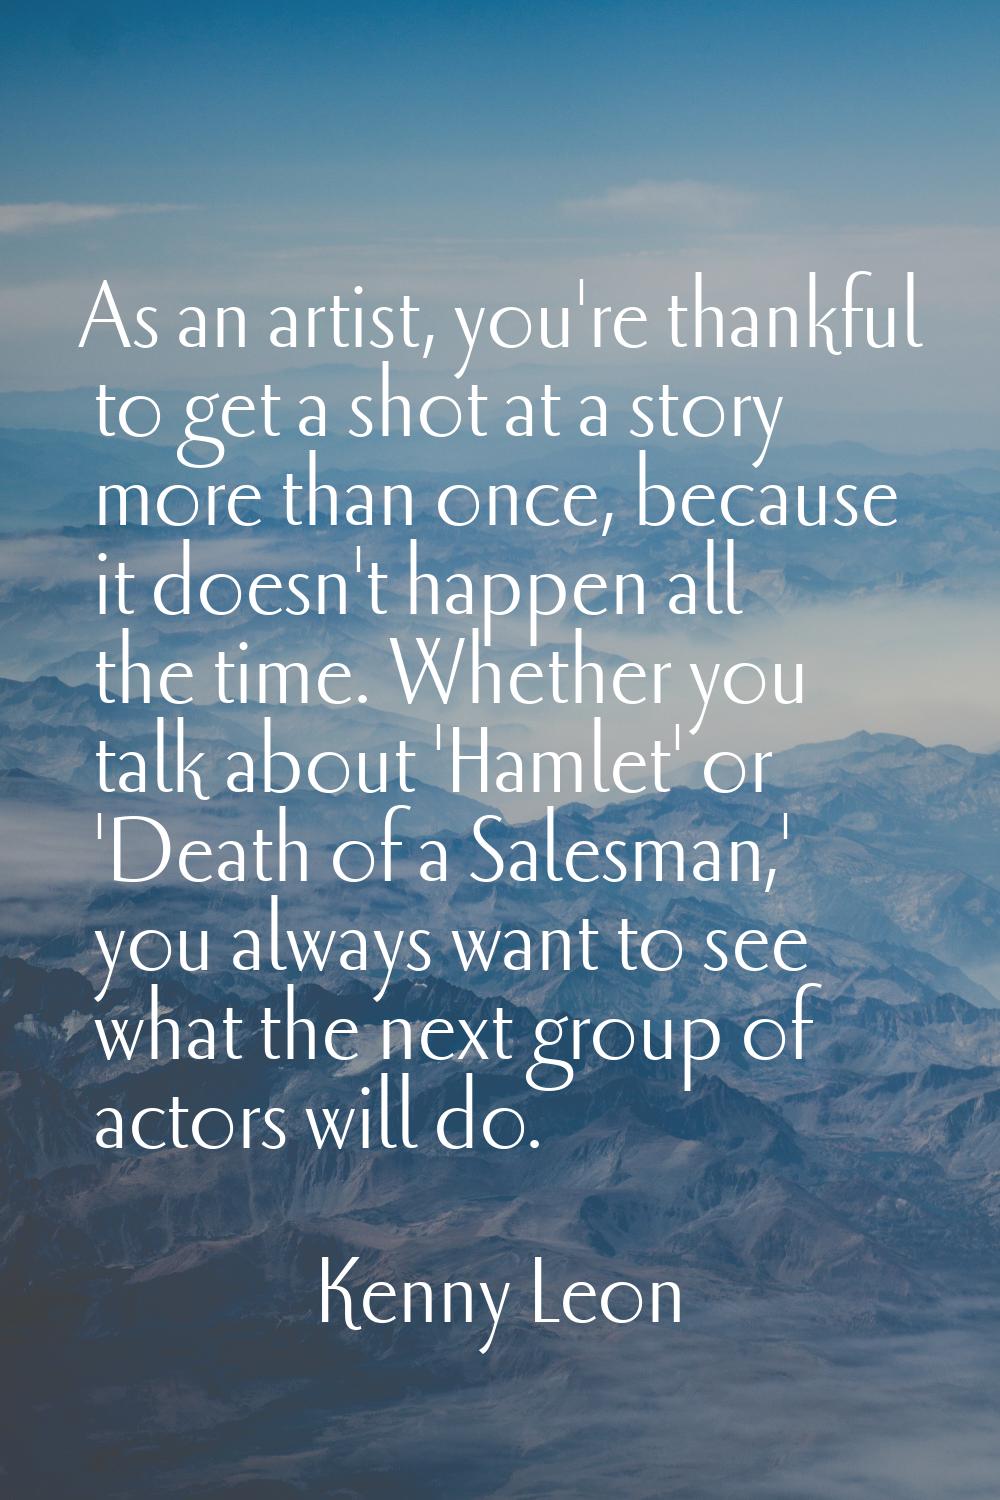 As an artist, you're thankful to get a shot at a story more than once, because it doesn't happen al